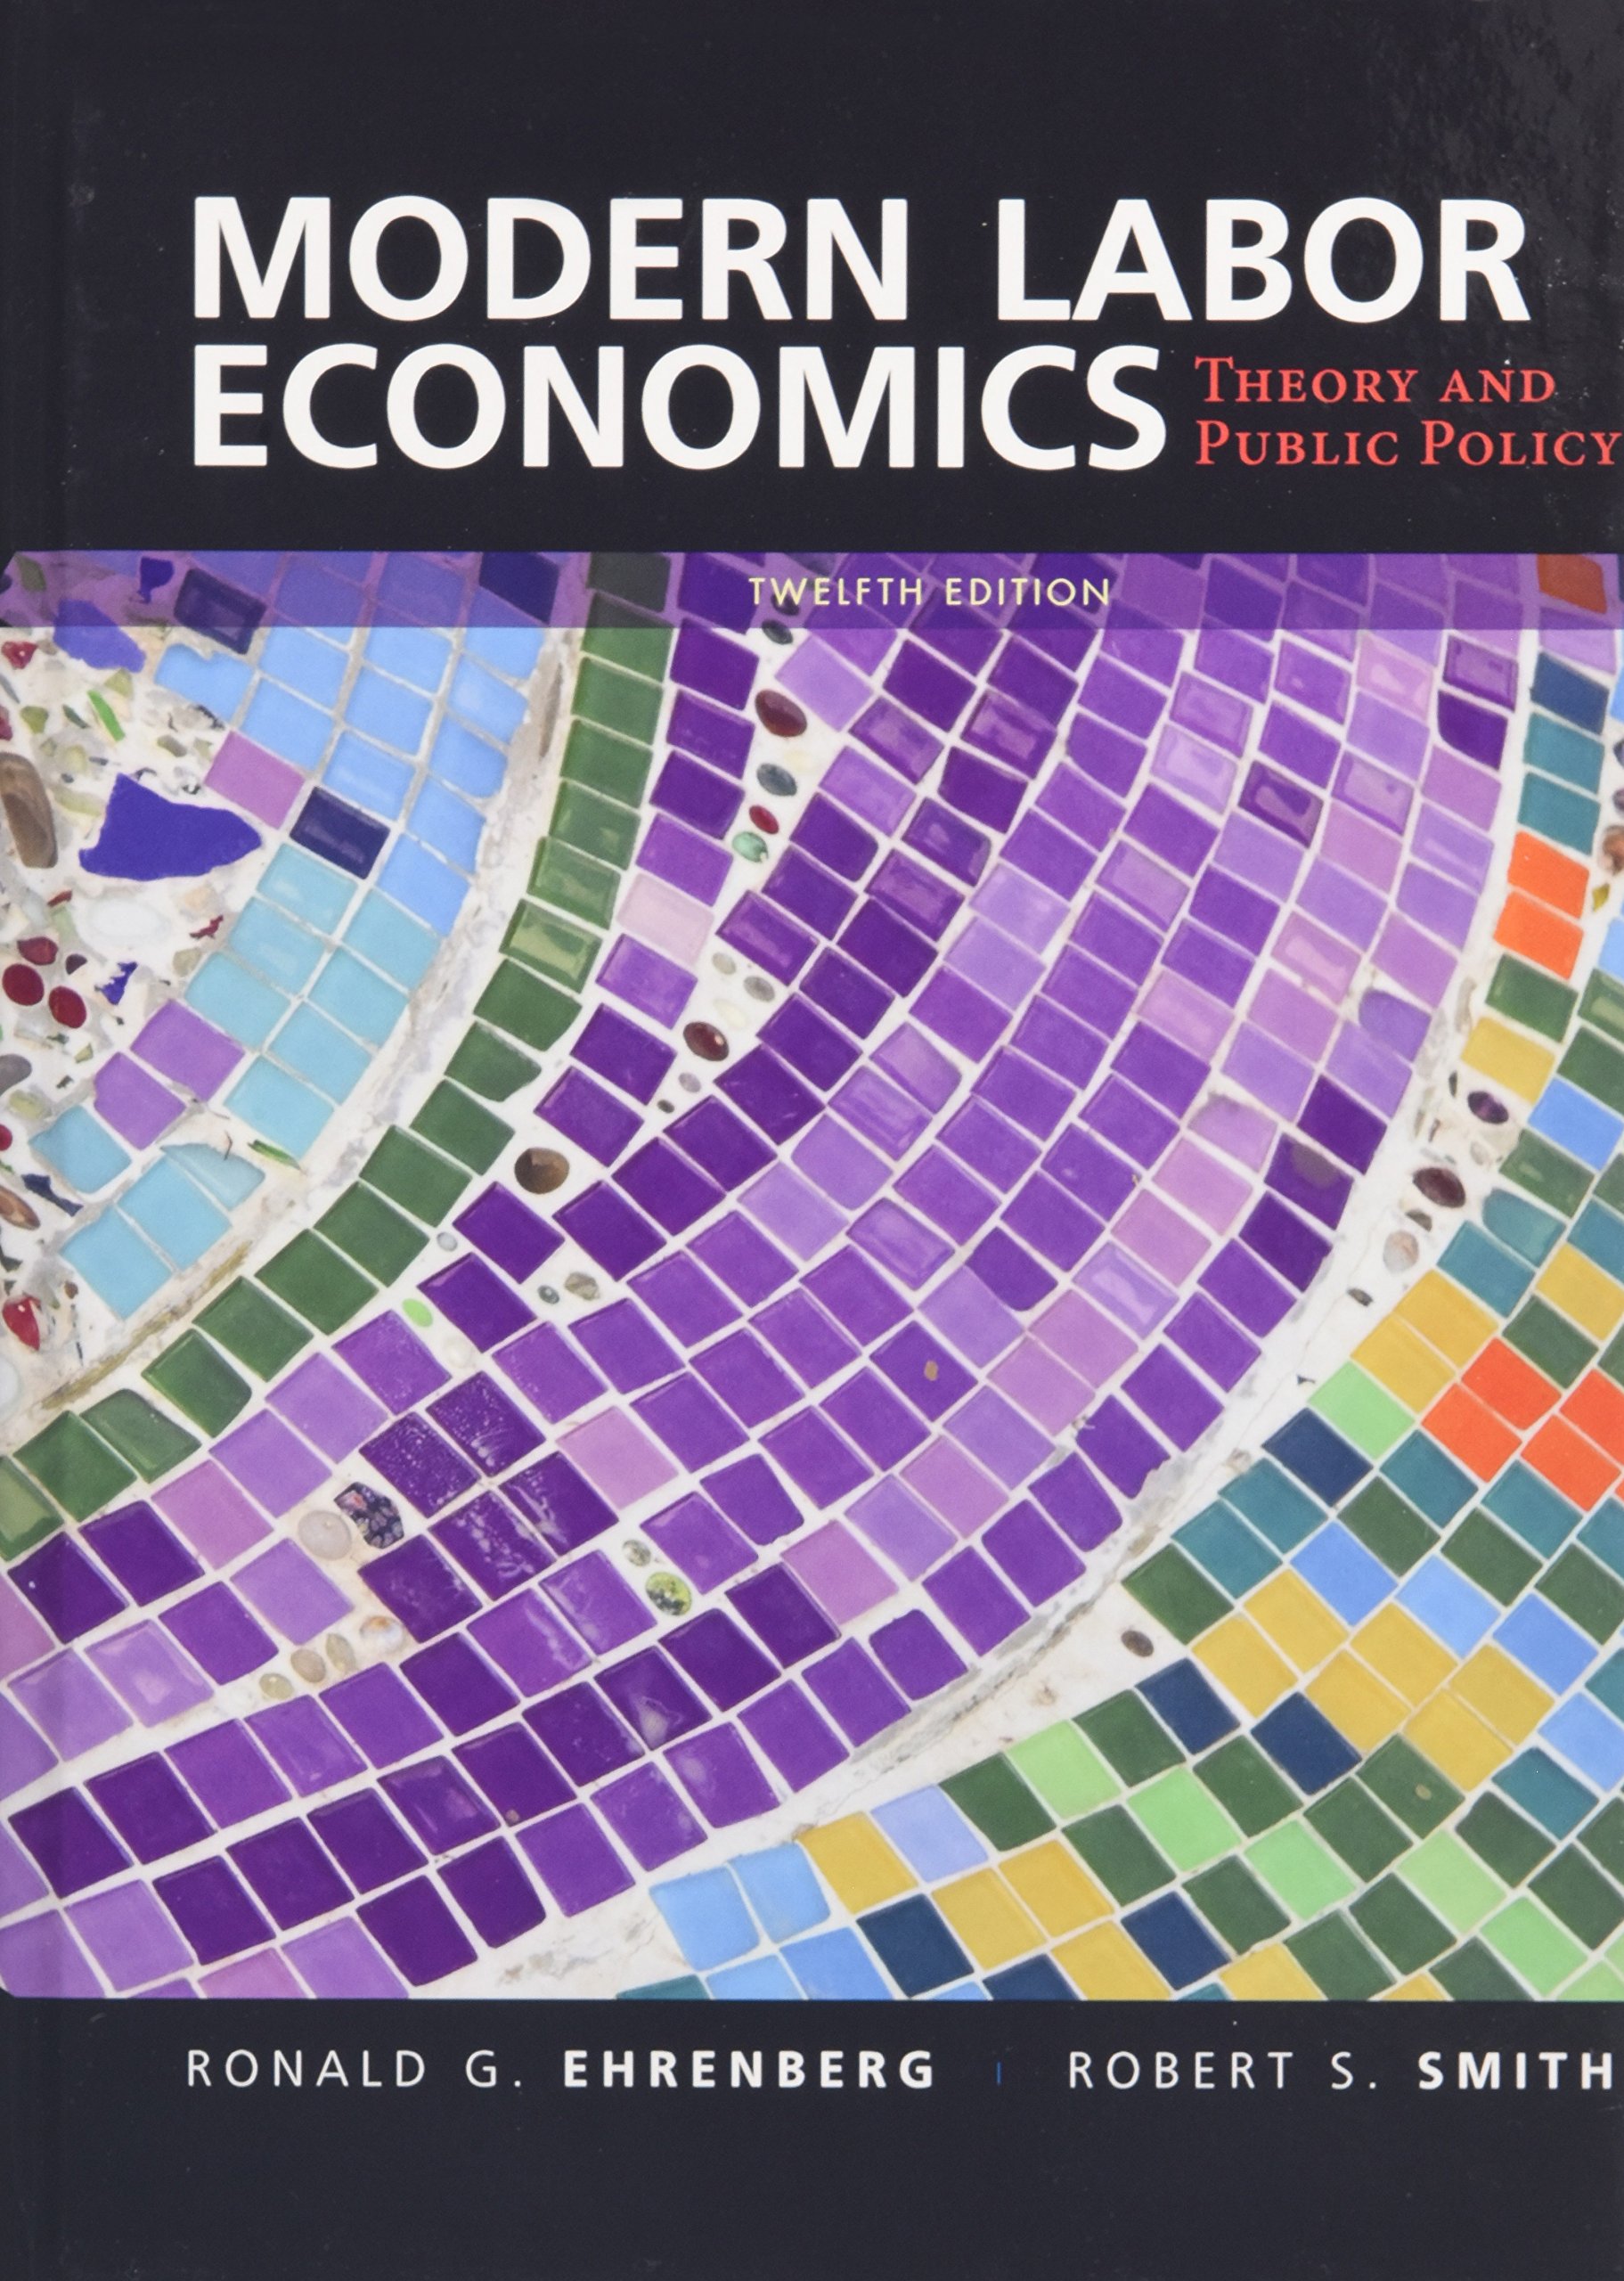 Book Cover Modern Labor Economics: Theory and Public Policy (12th Edition)